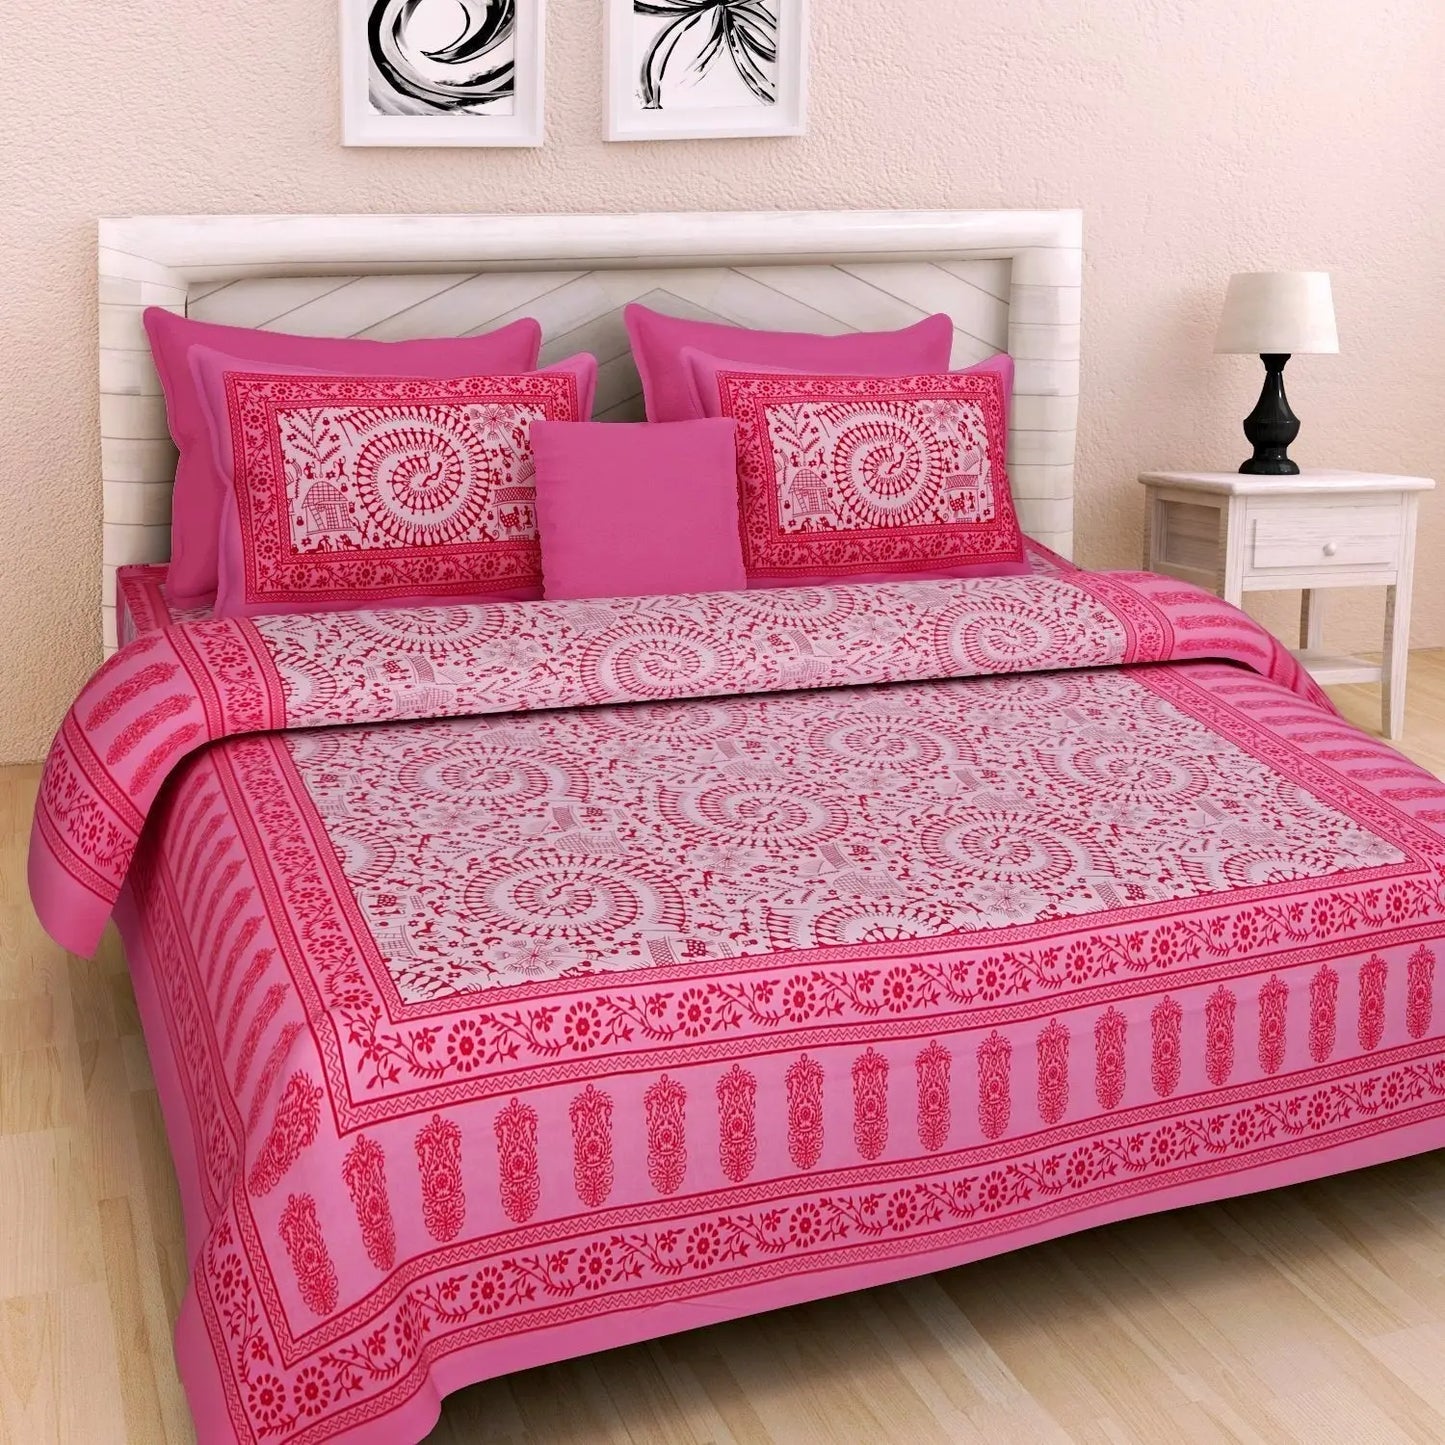 JAIPUR PRINTS Traditional Jaipuri Print 1 Double Bed Sheet with 2 Pillow Covers (100% Cotton) www.jaipurtohome.com